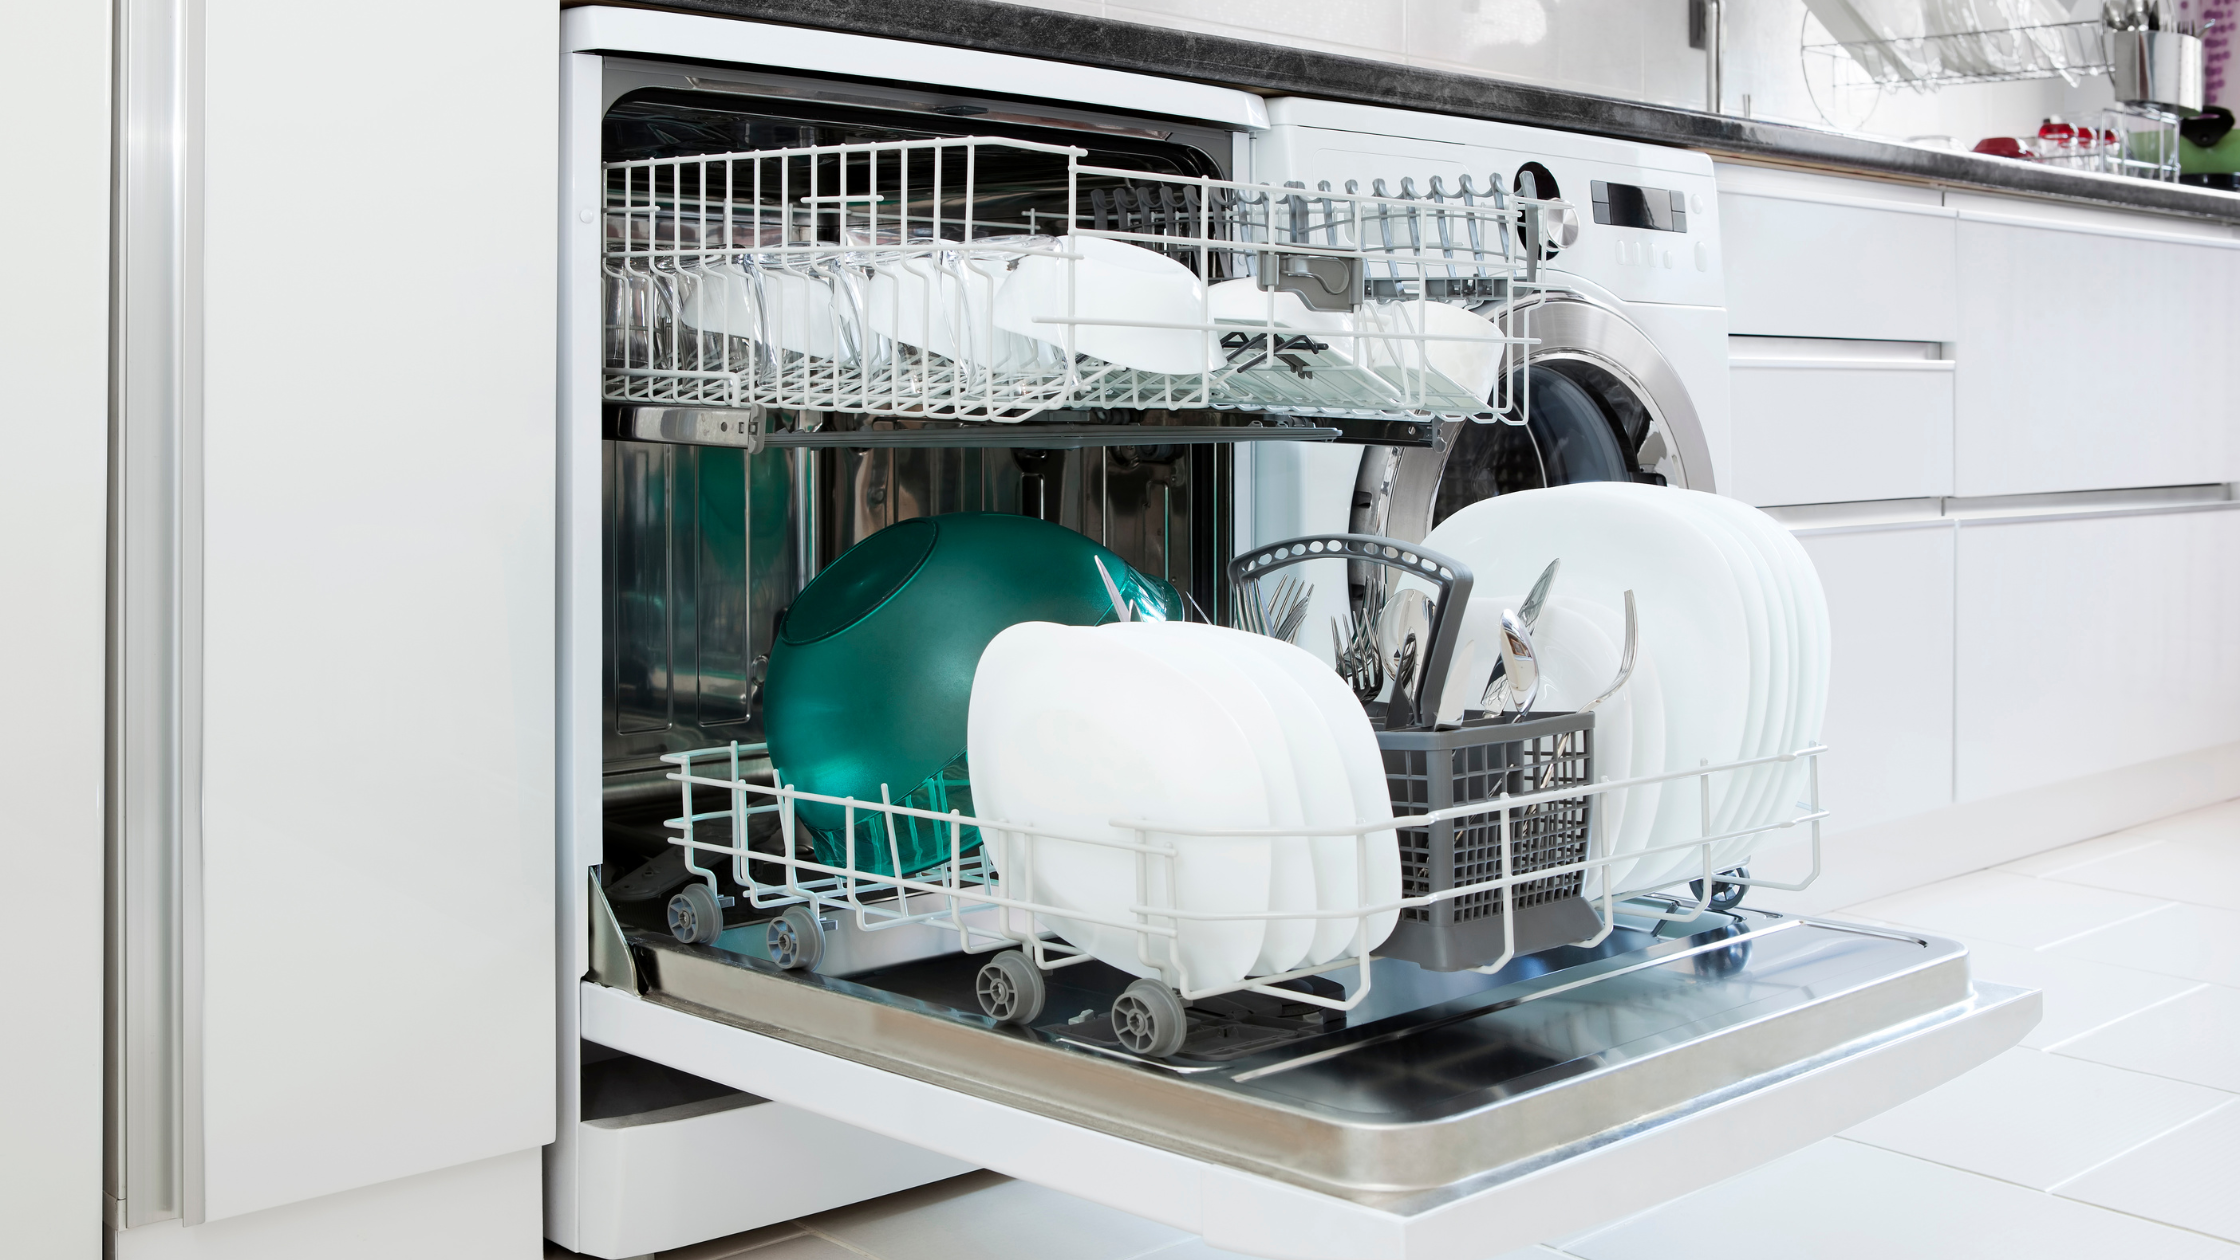 Dishes drying in a dishwasher